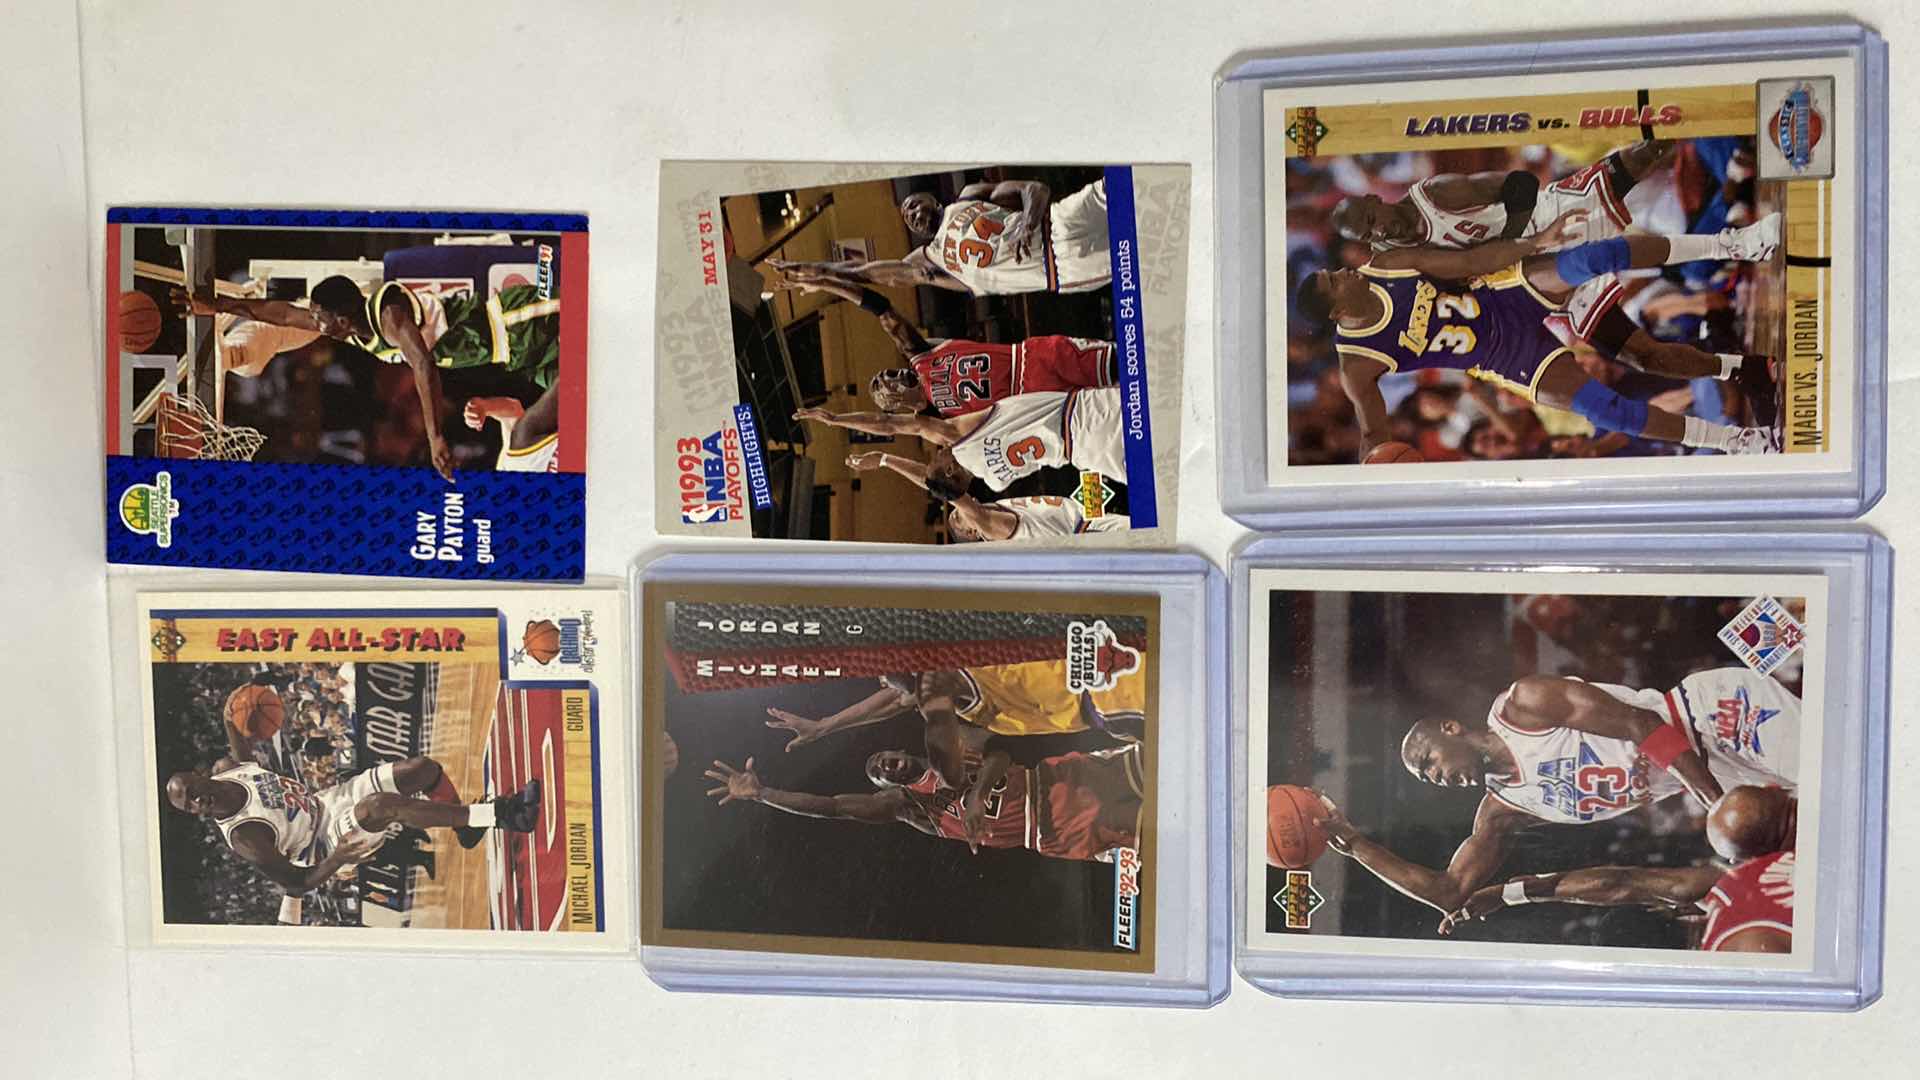 Photo 1 of 6 COLLECTIBLE BASKETBALL CARDS - 5 ARE MICHAEL JORDAN